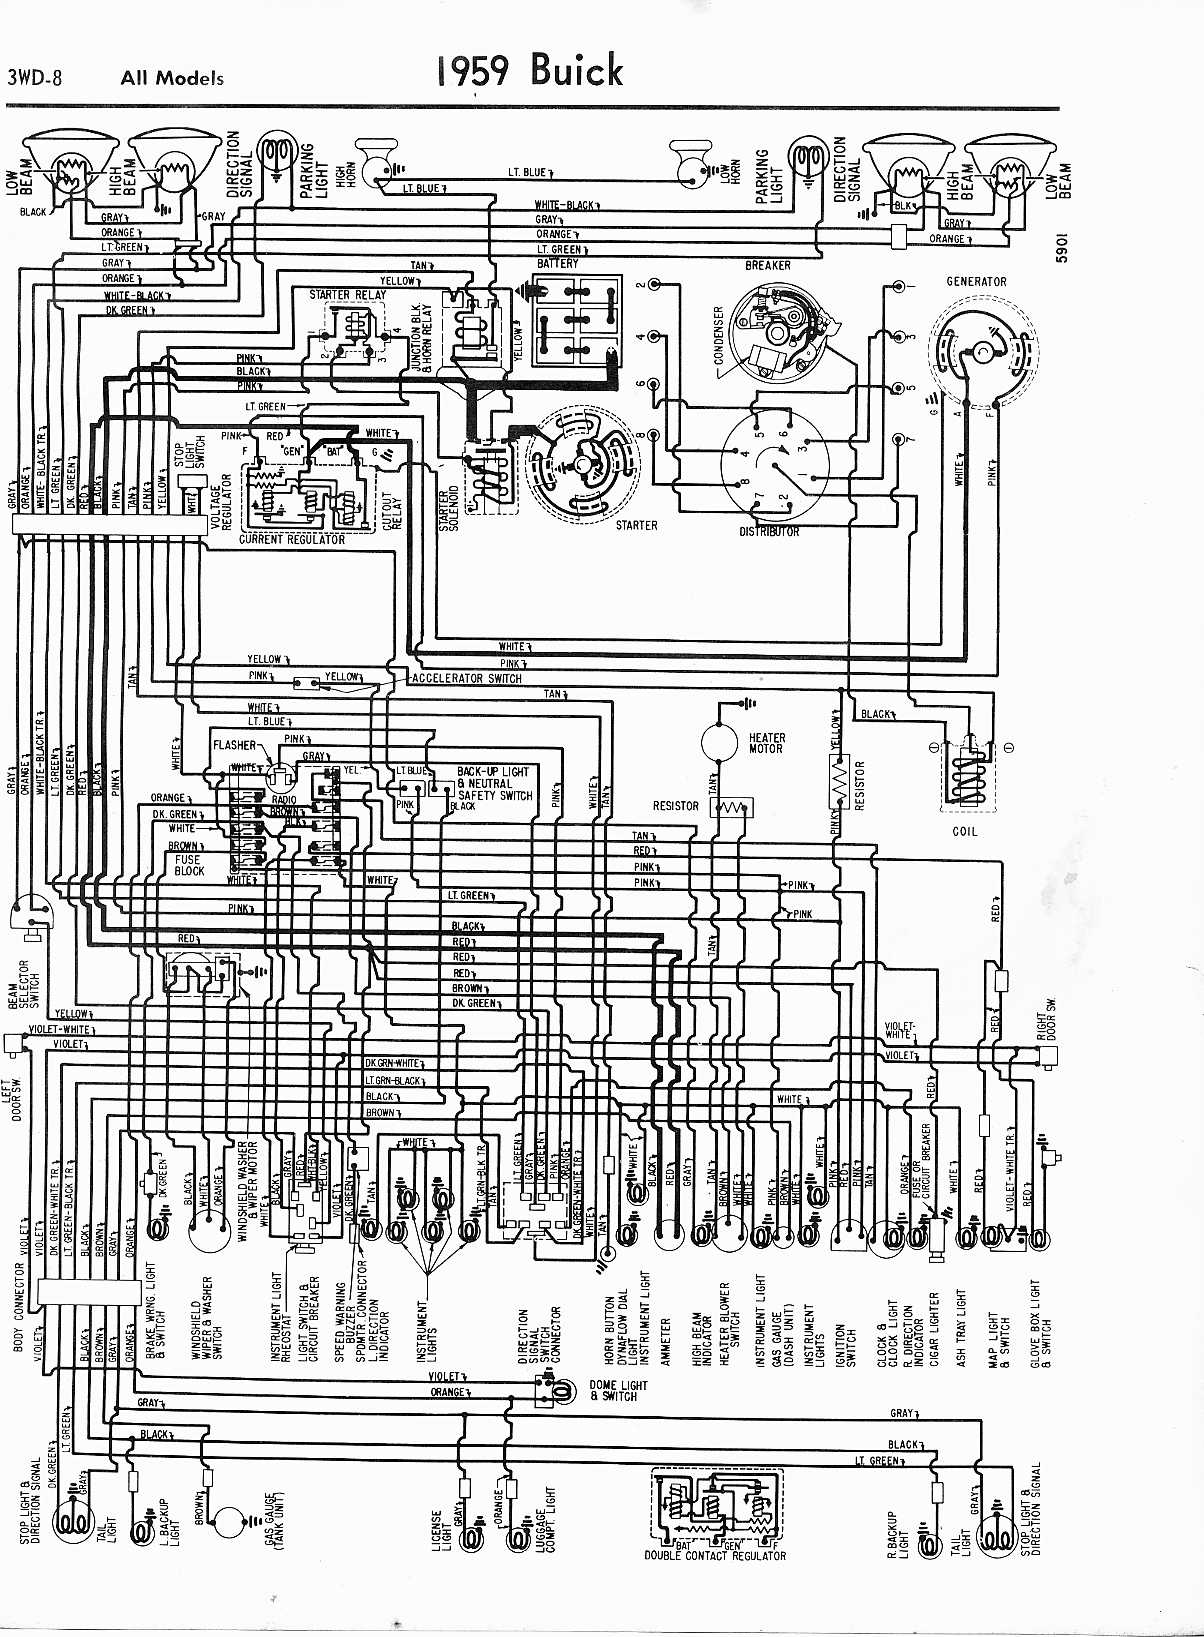 1996 Buick Century Wiring Diagram from www.oldcarmanualproject.com